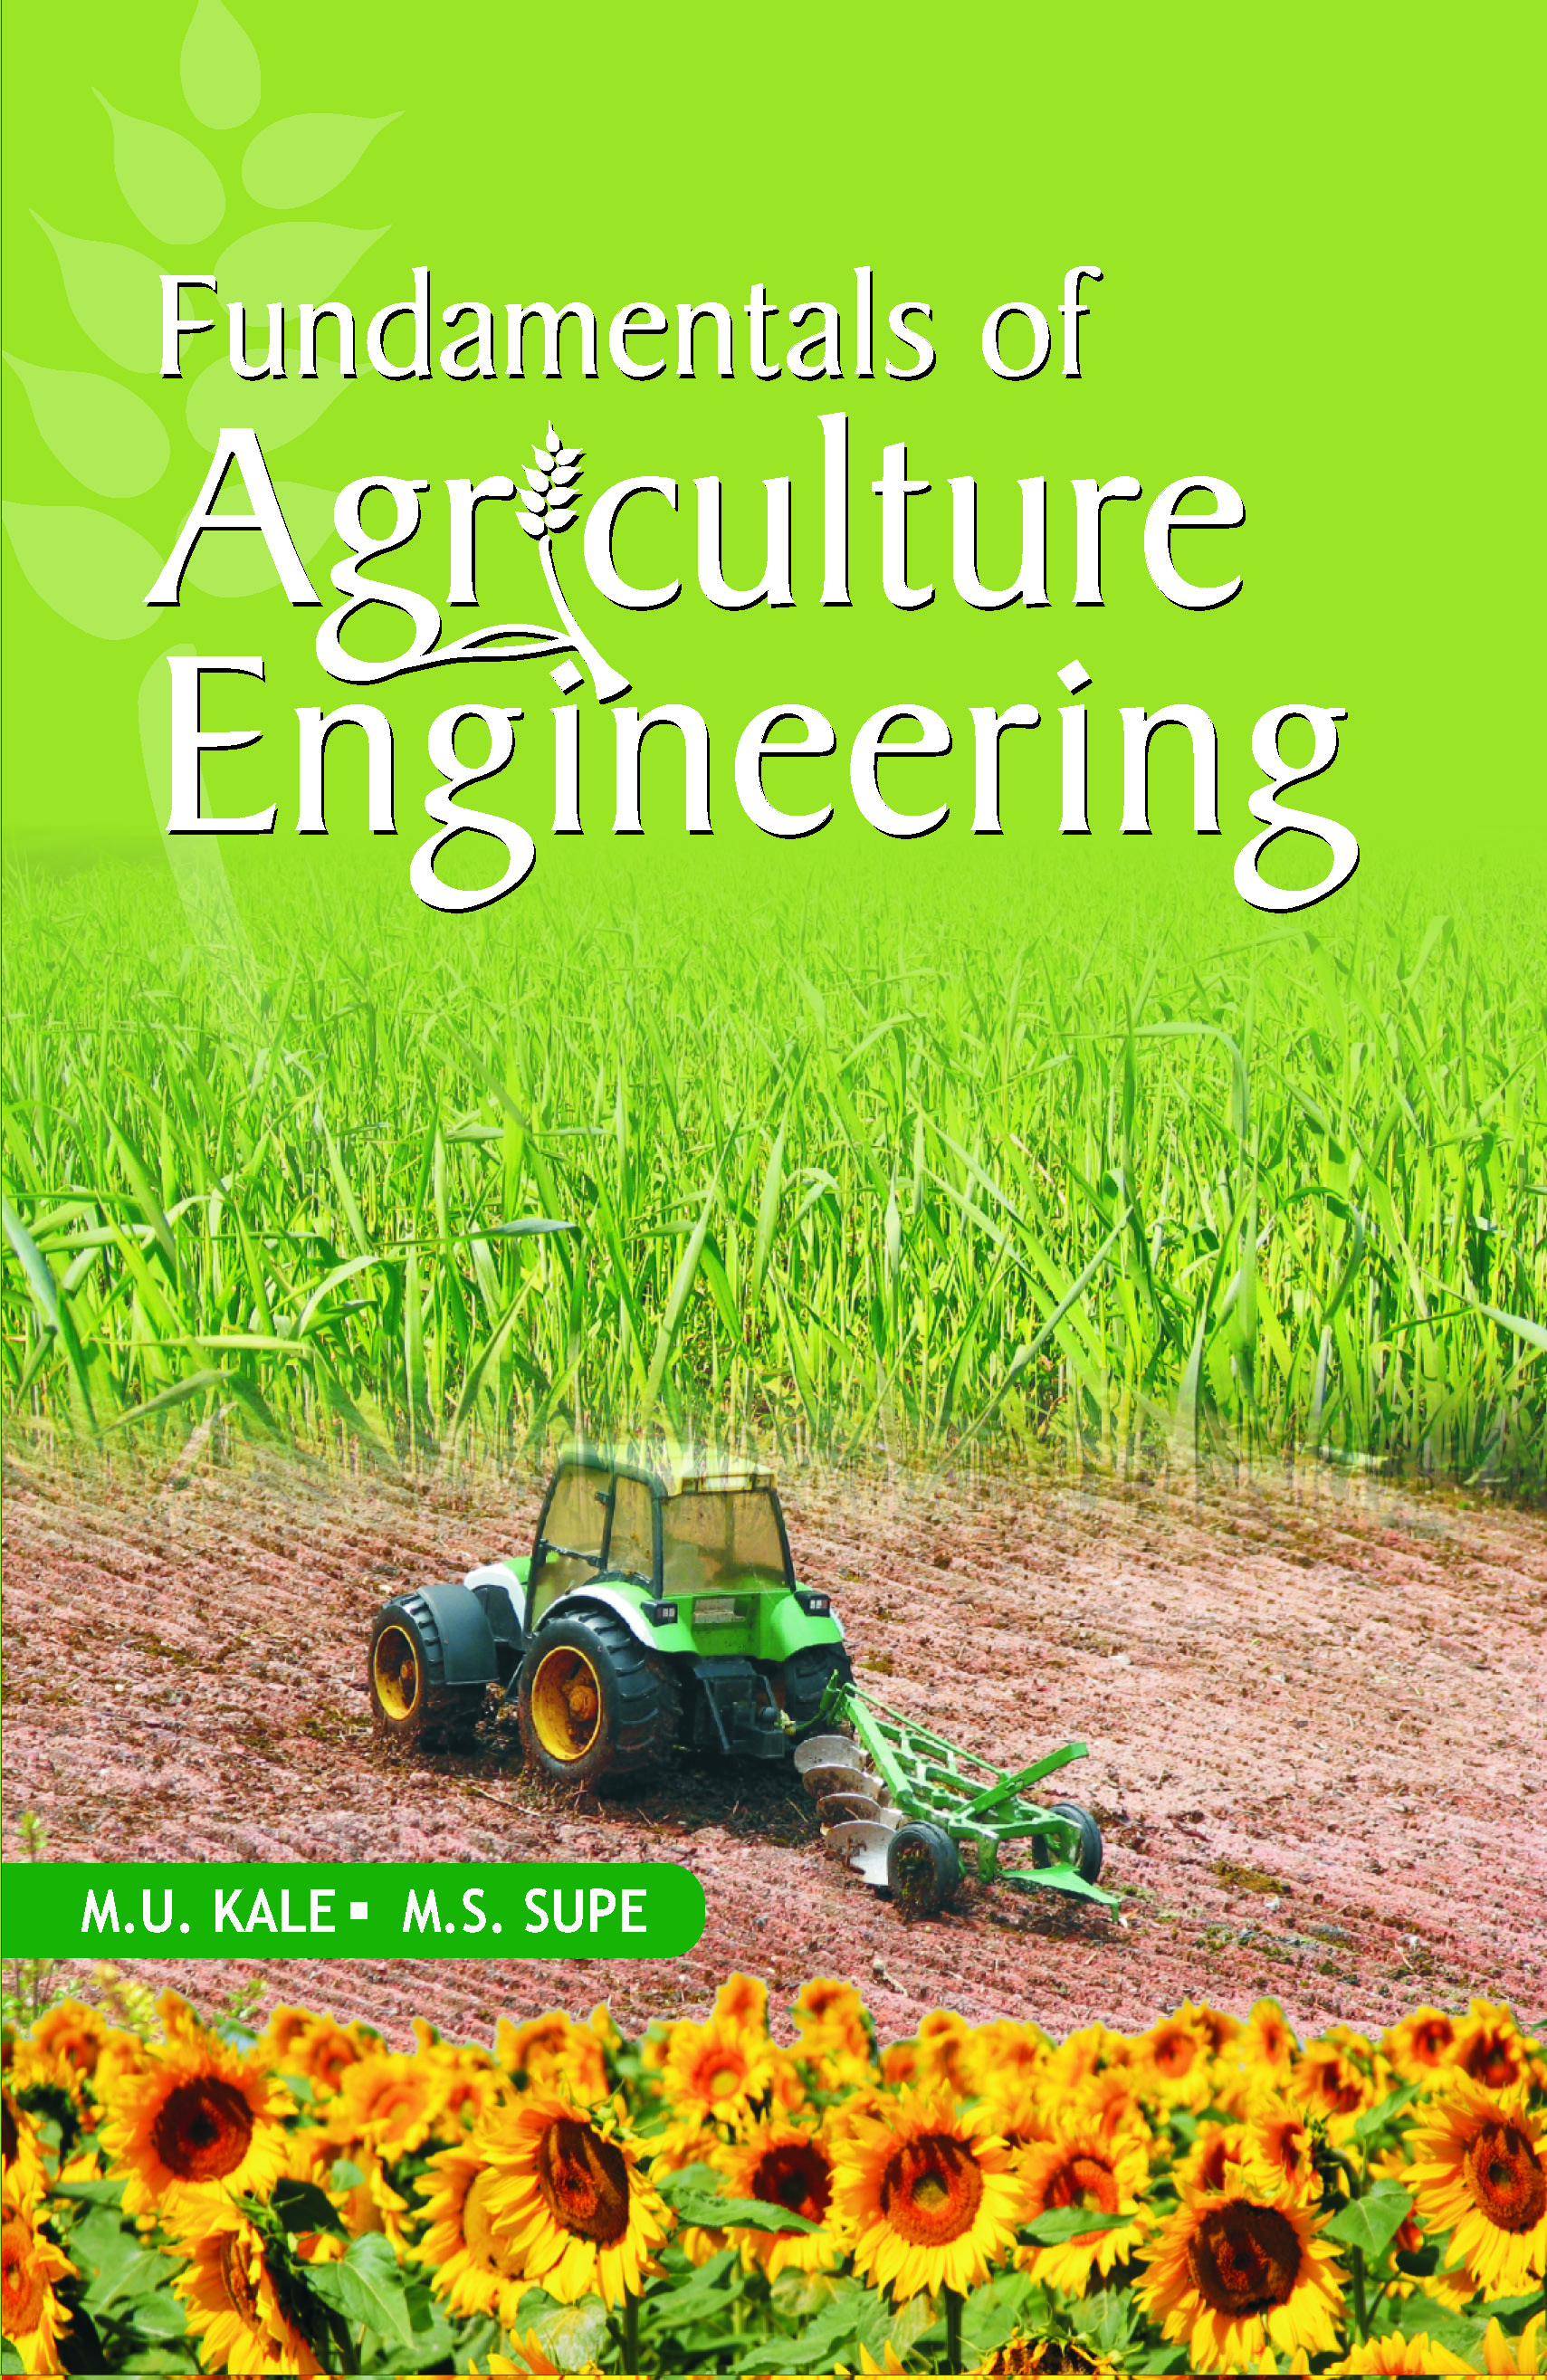 mechanical engineering thesis about agriculture